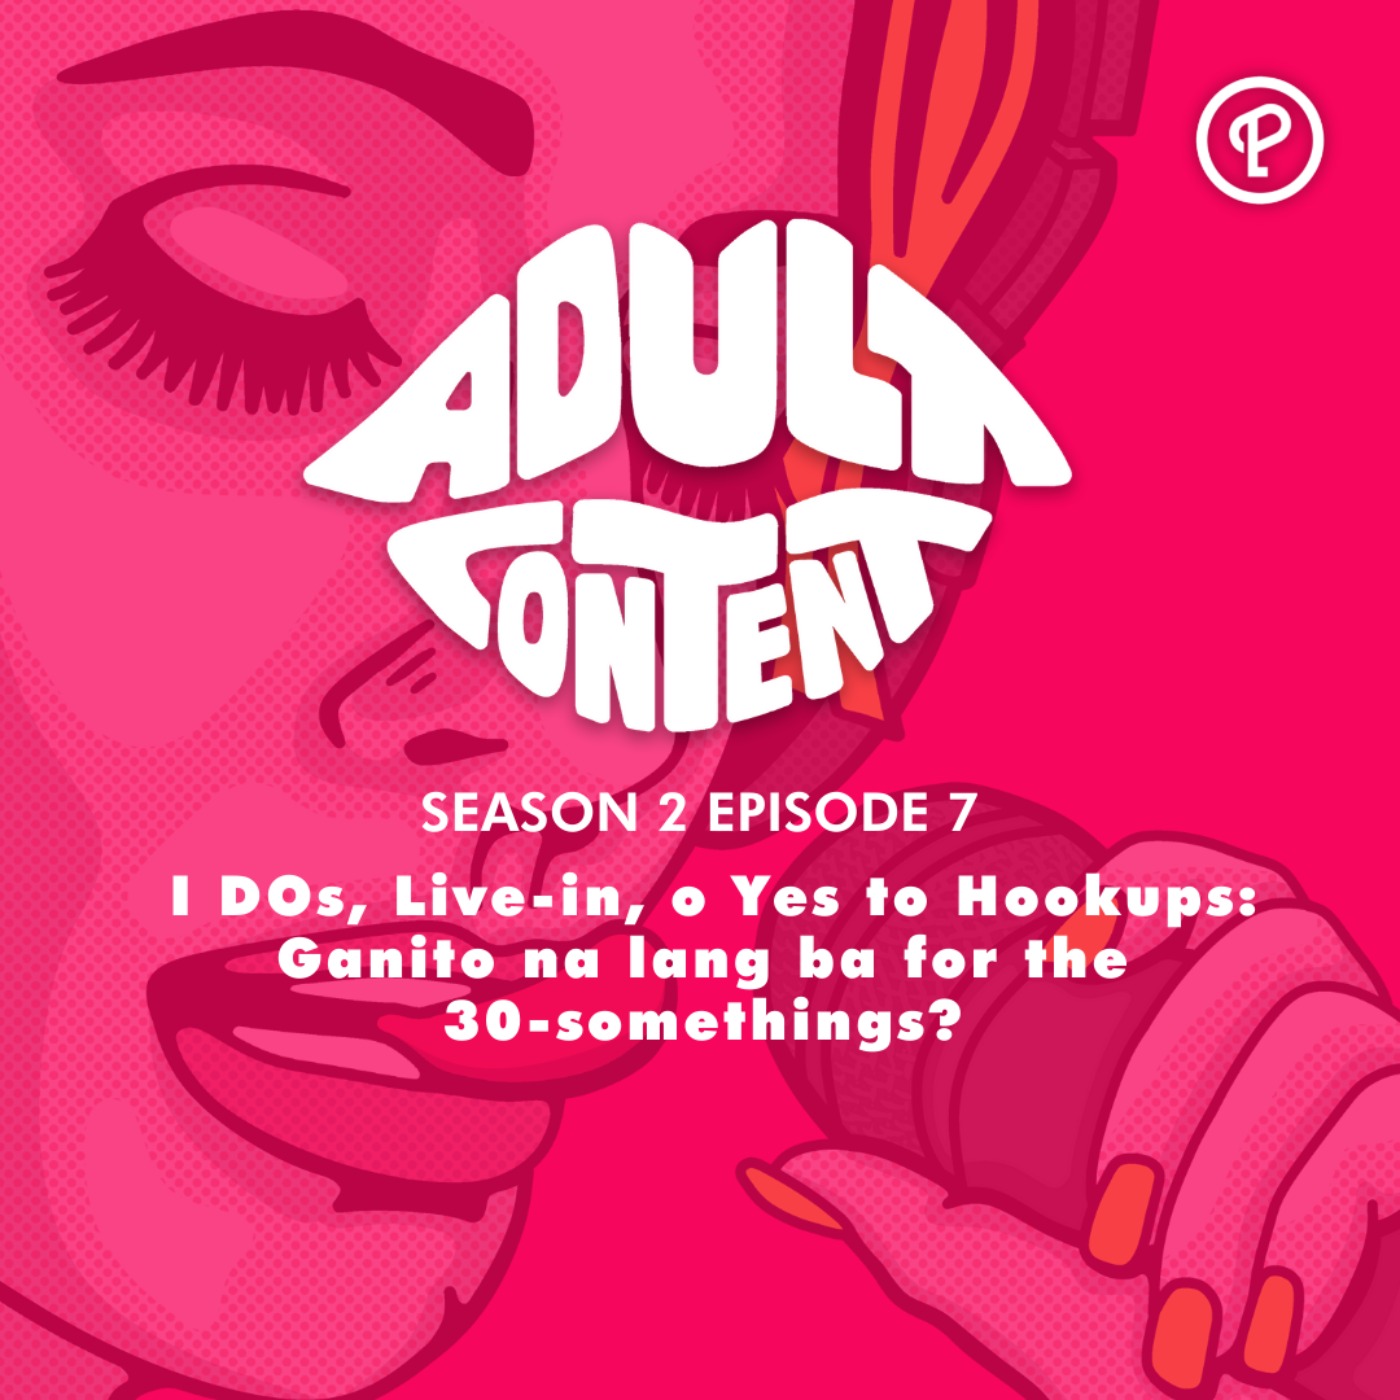 S2E7: I DOs, Live-in, o Yes to Hookups: Ganito na lang ba for the 30-somethings?